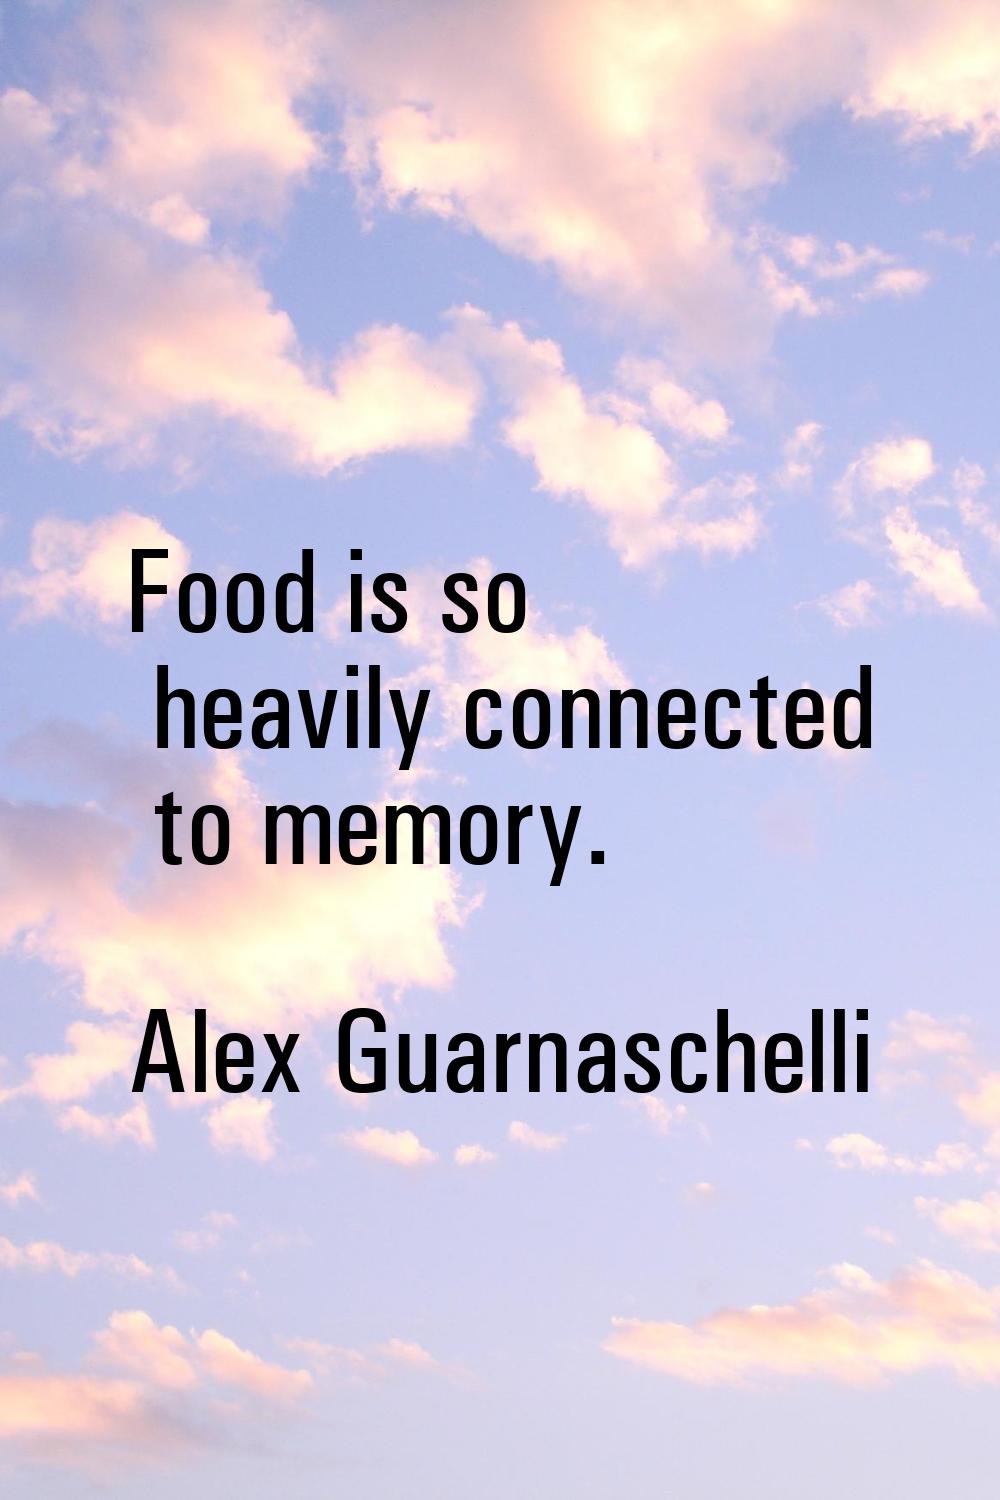 Food is so heavily connected to memory.